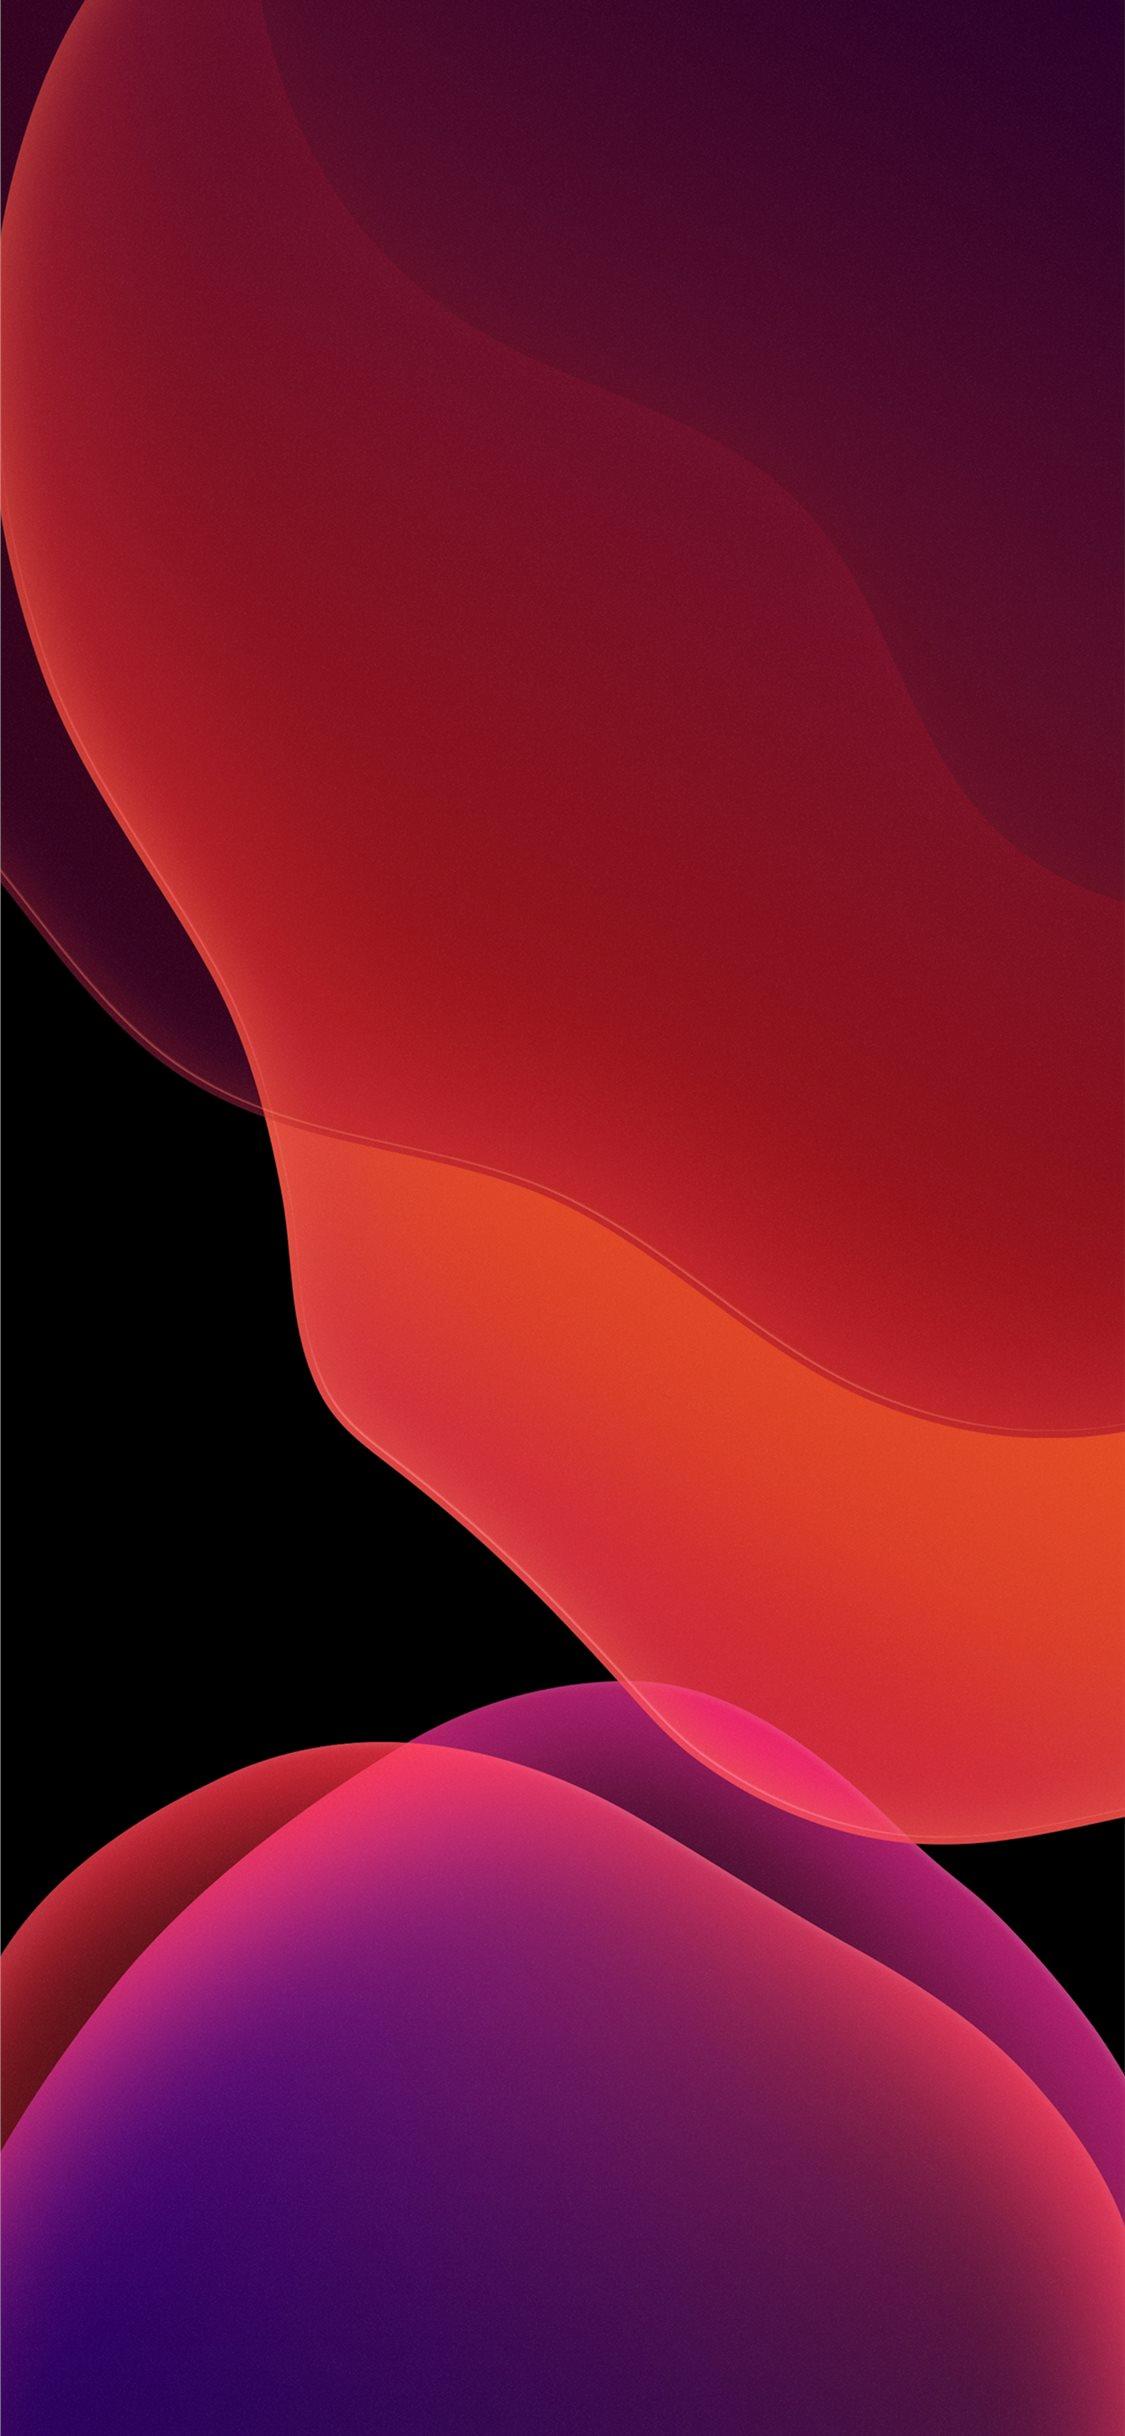 iPhone iOS Wallpapers - Wallpaper Cave